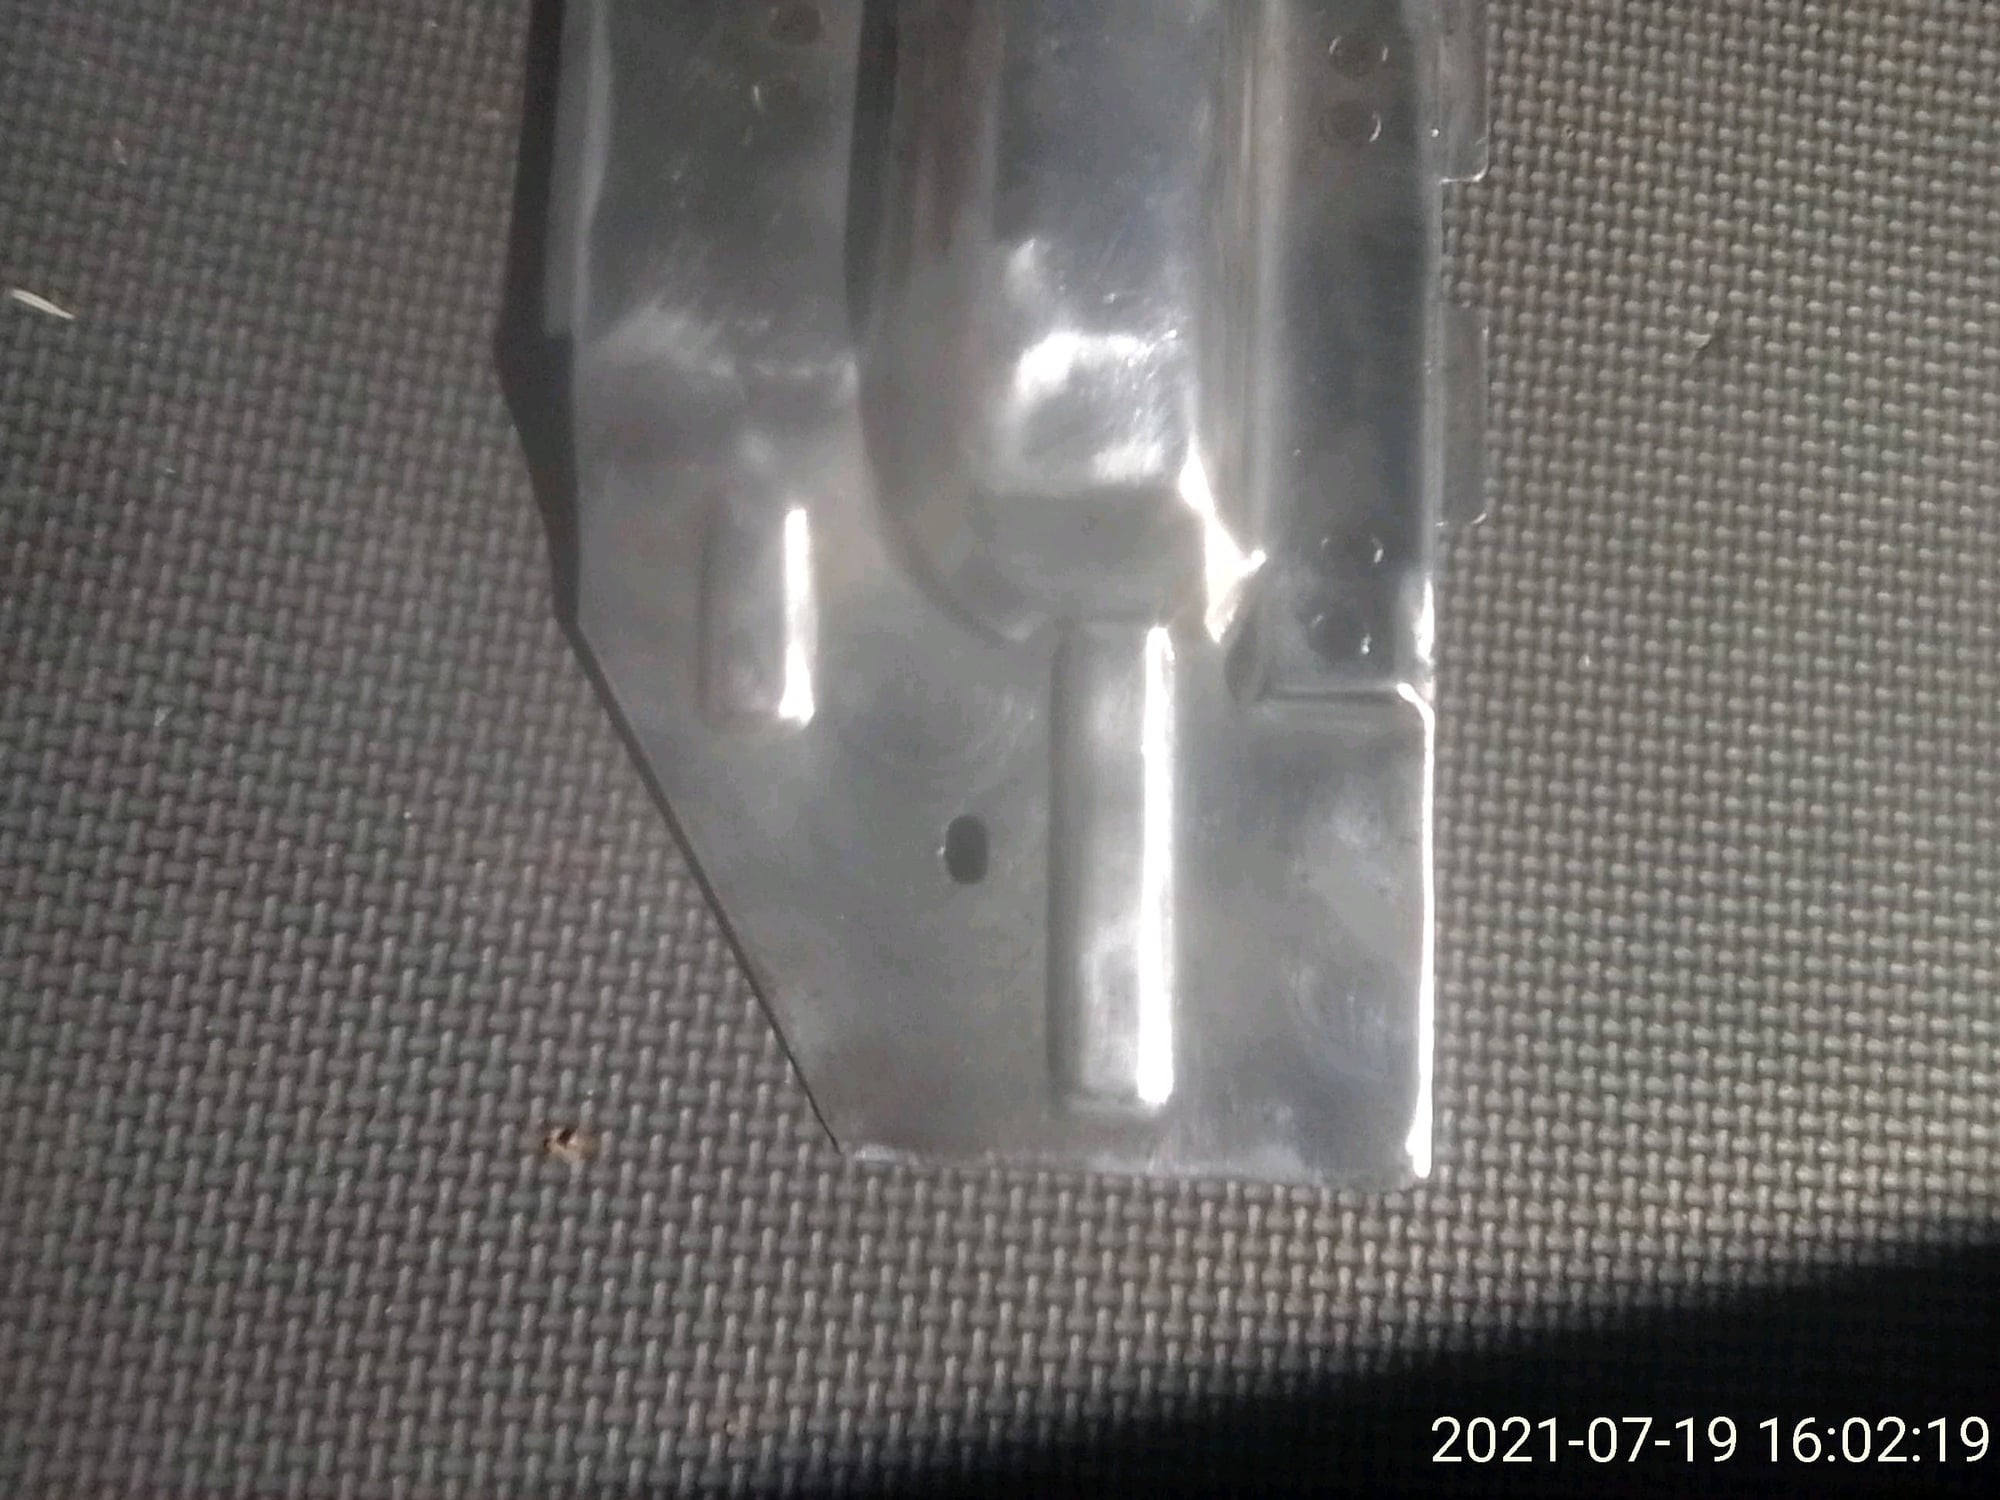 Miscellaneous - FD - OEM Motor Mount Cover Plate - Used - 1993 to 1995 Mazda RX-7 - San Jose, CA 95121, United States